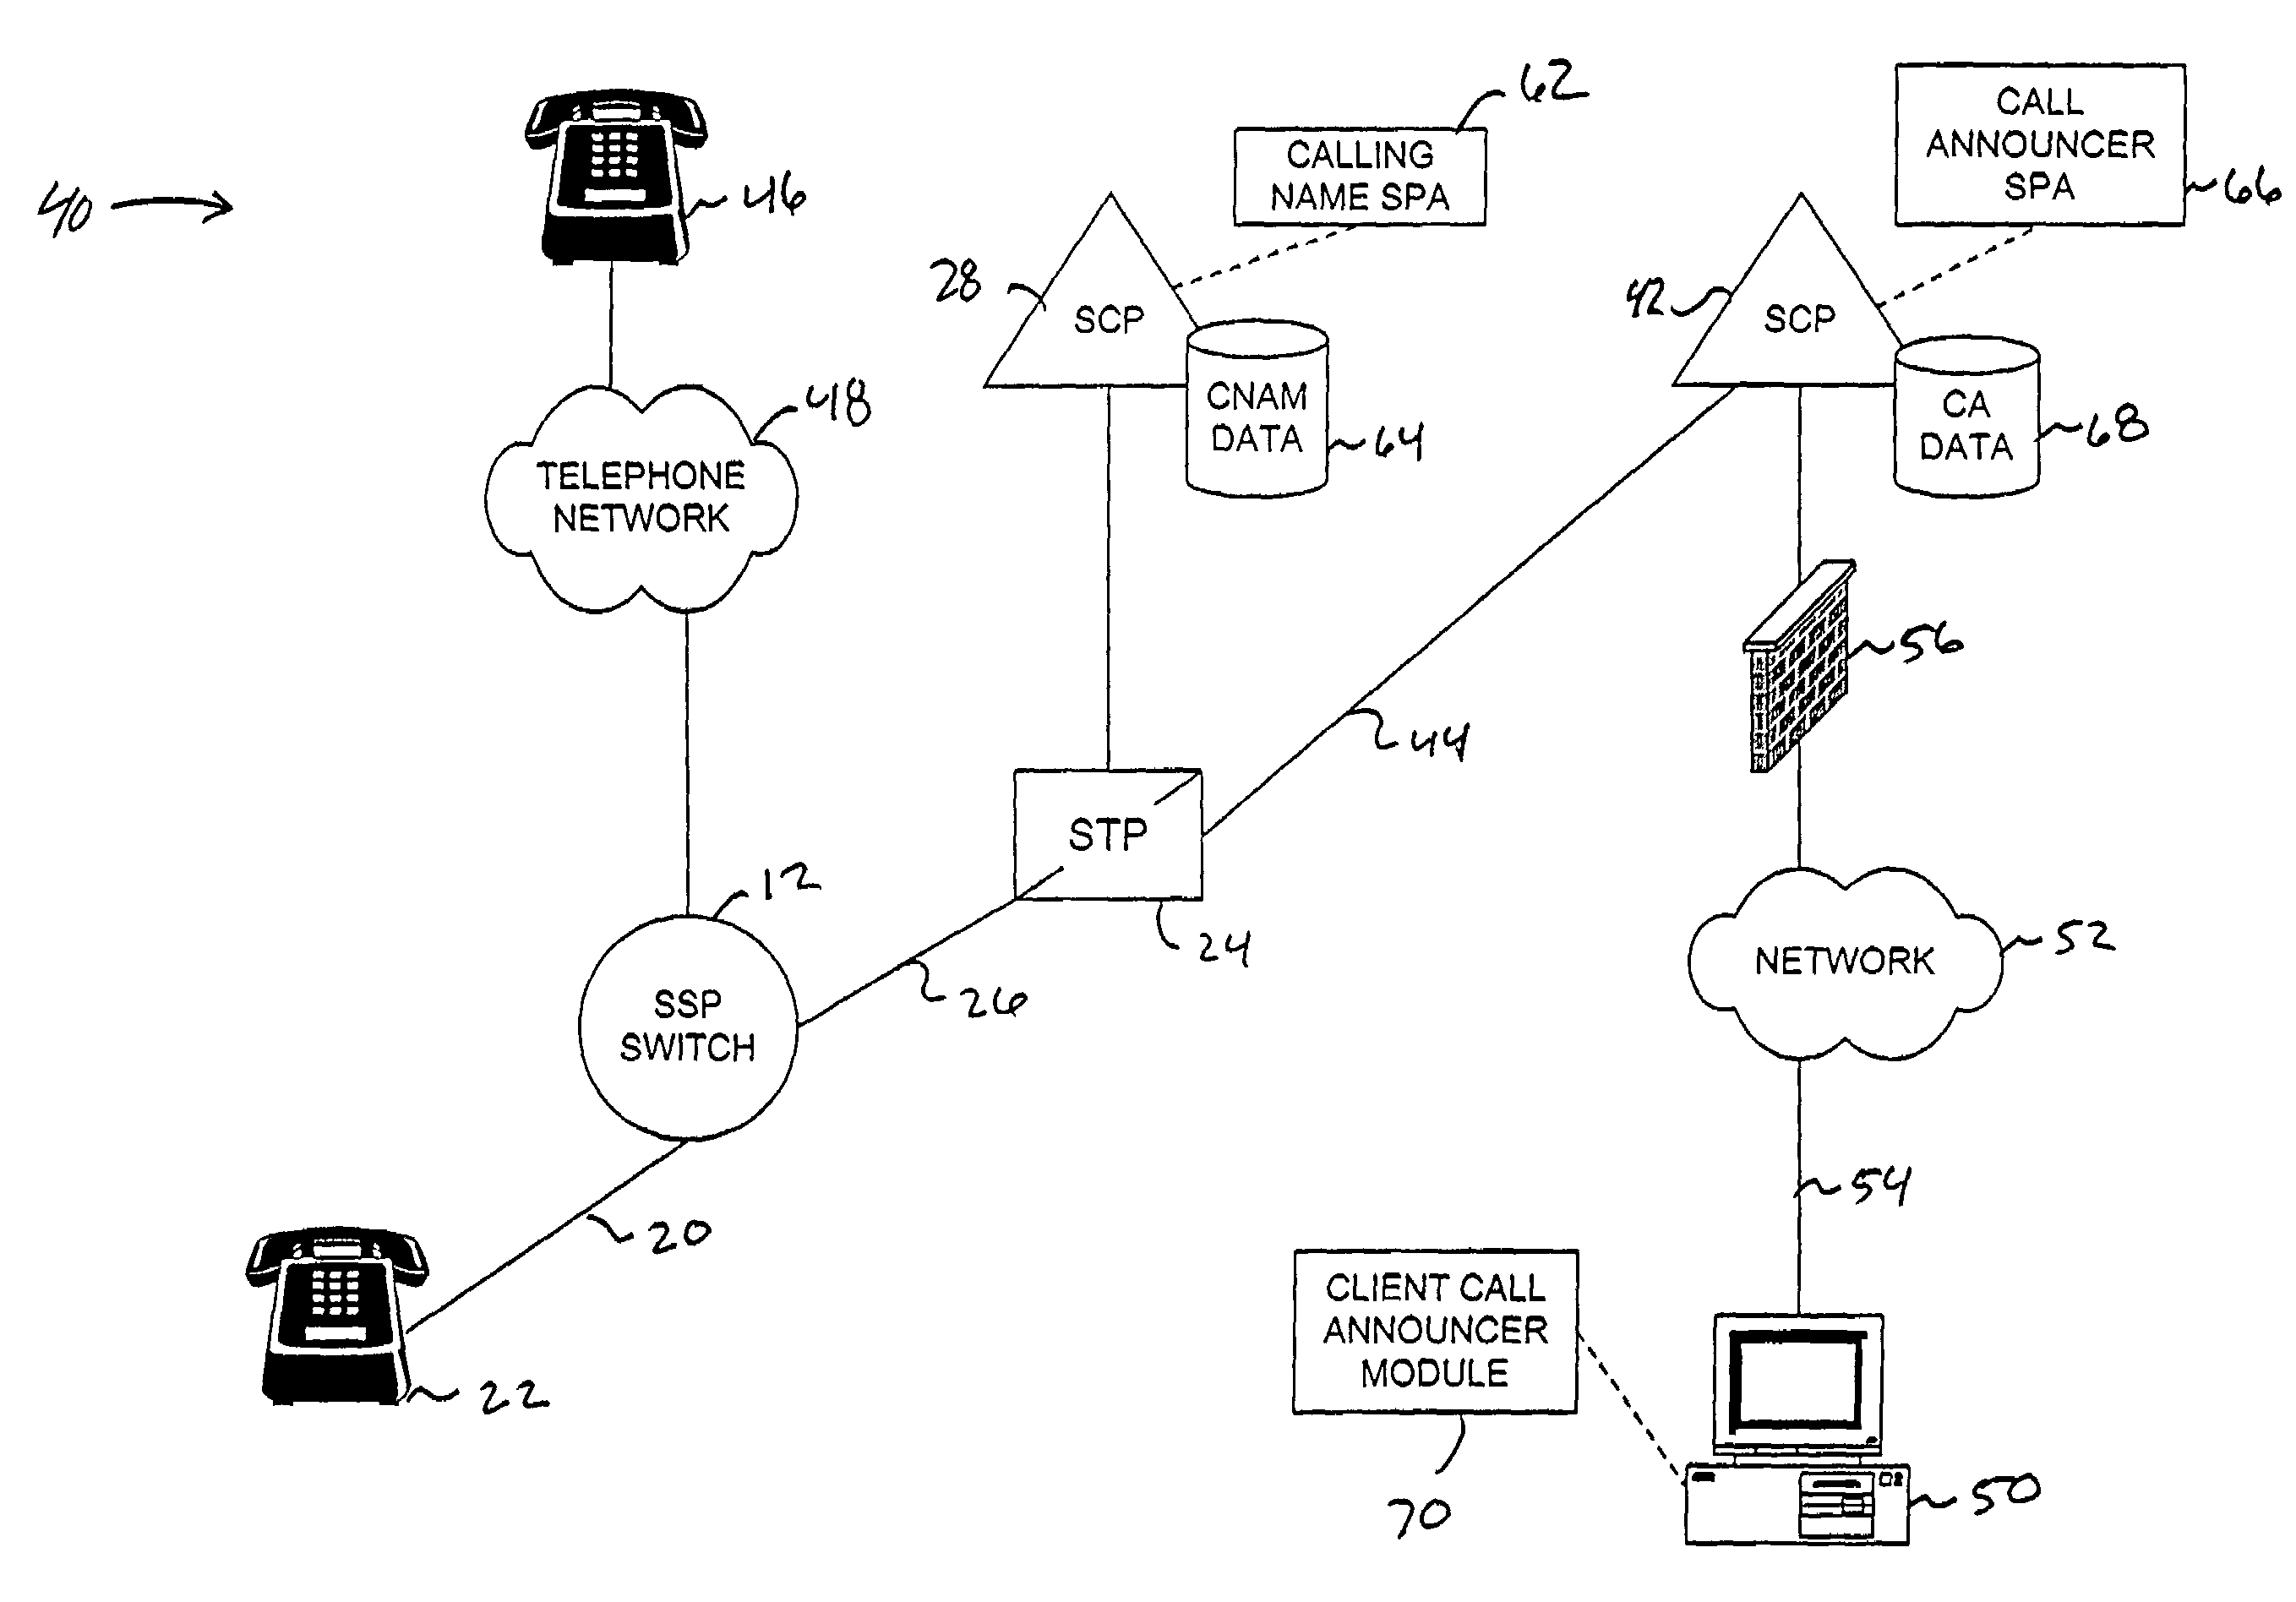 System and method for monitoring incoming communications to a telecommunications device